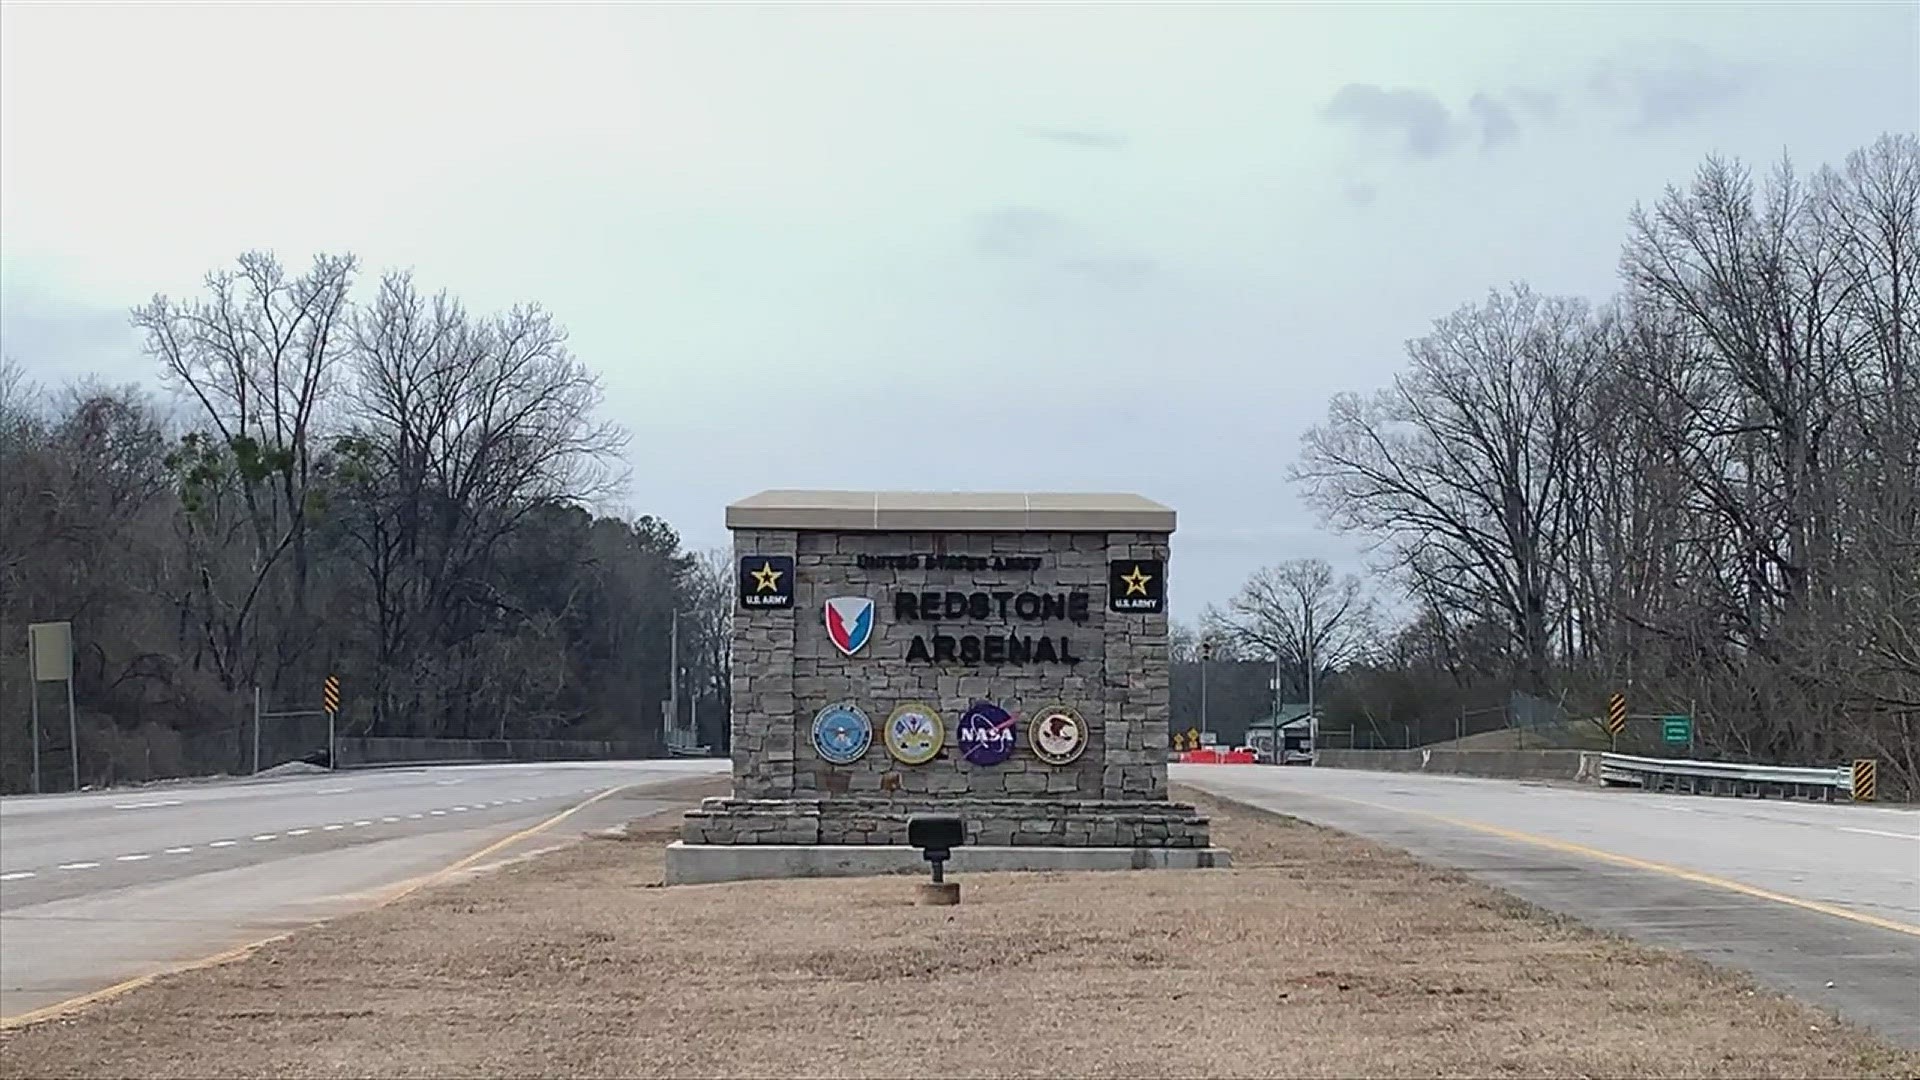 Marshall Space Flight Center will resume normal operations Saturday following the rupture, which has since been repaired.